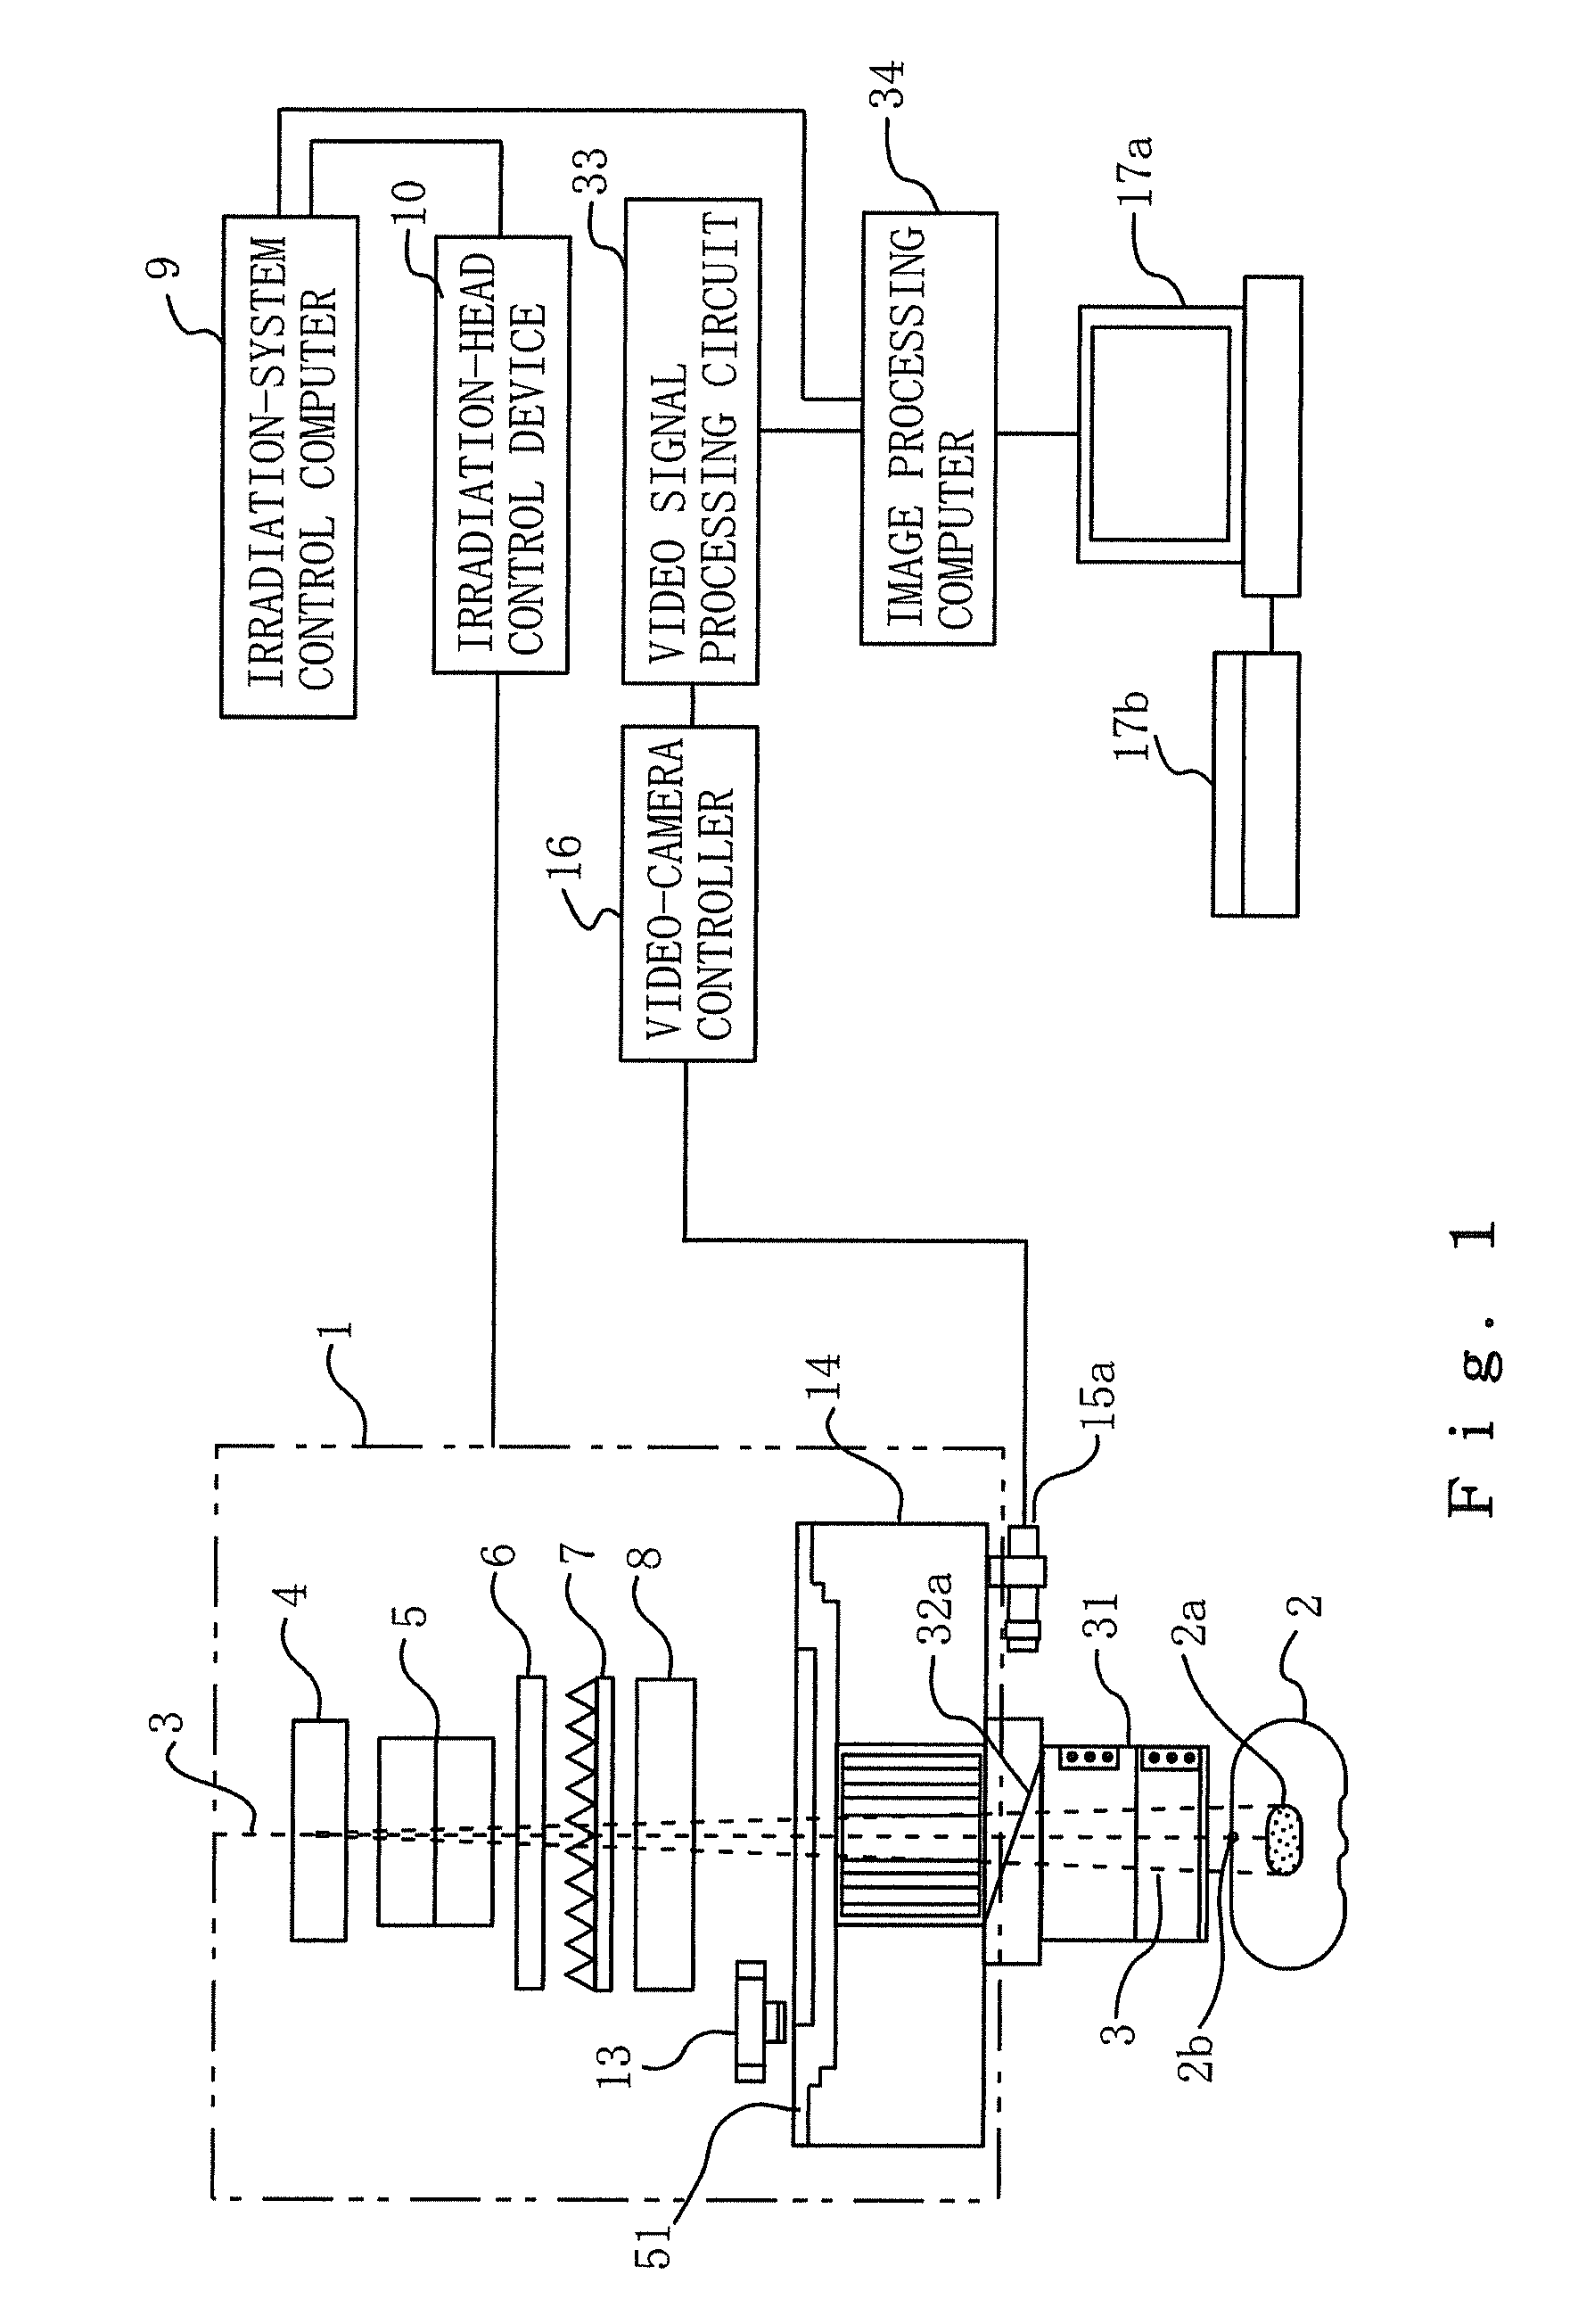 Particle-Beam Treatment System